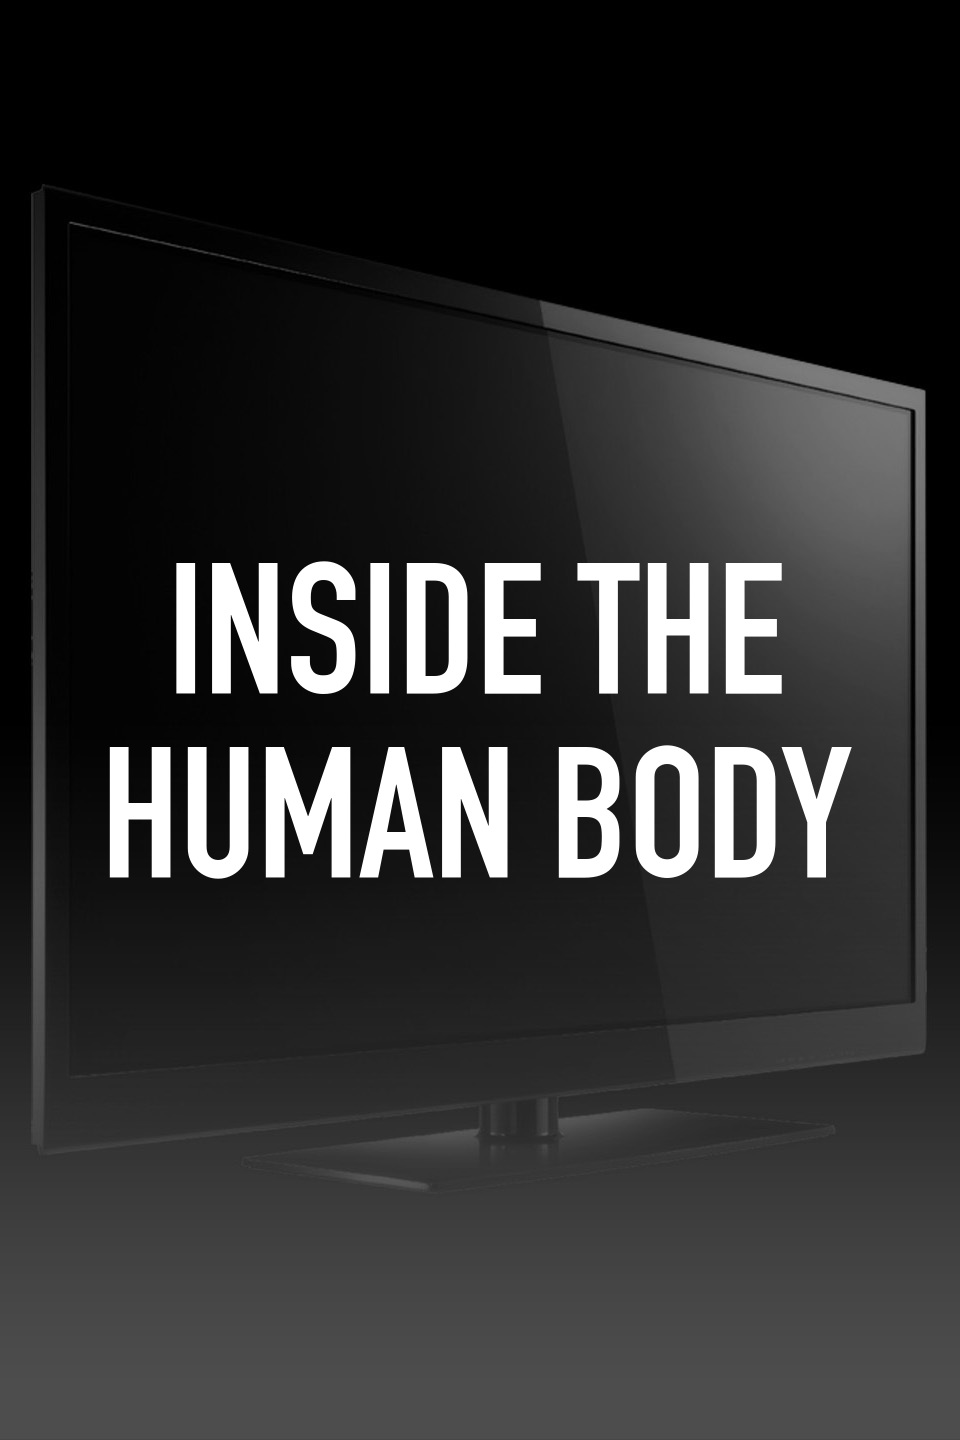 movie about journey inside the human body